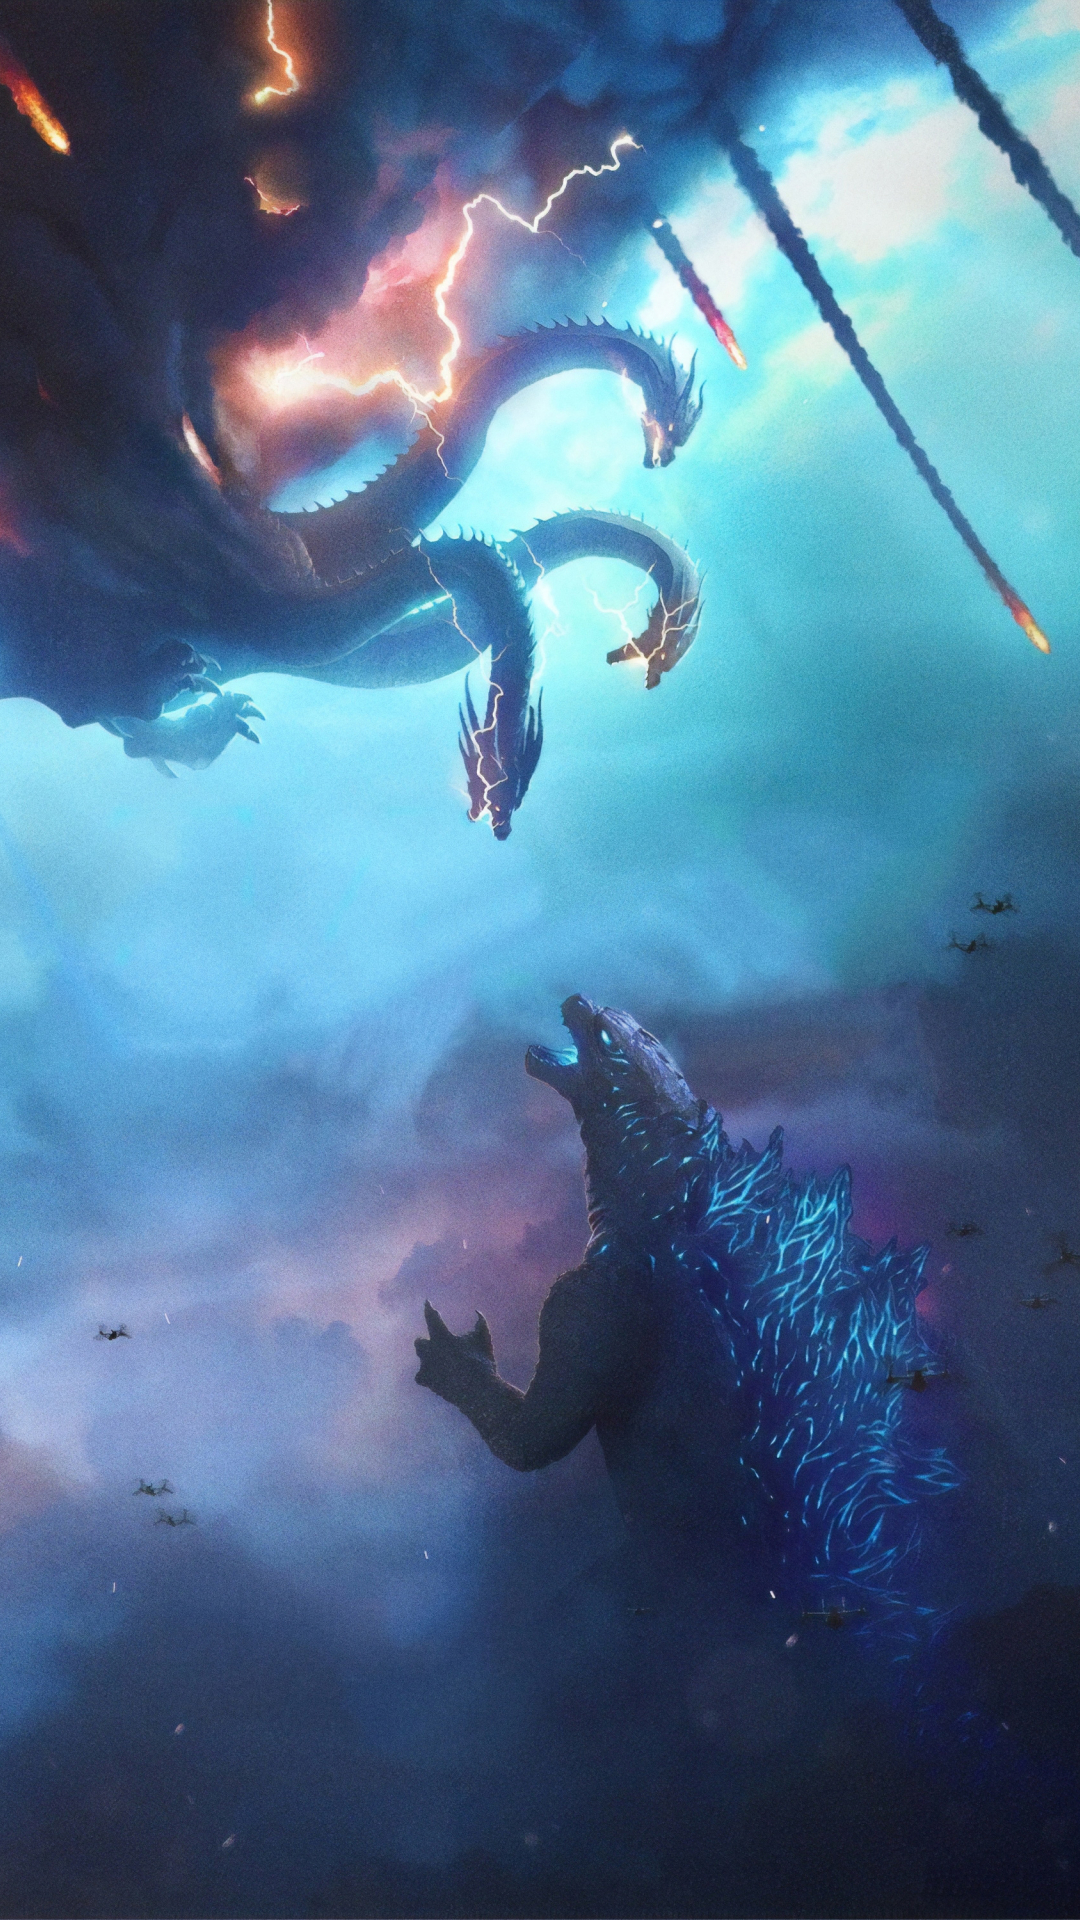 1080x1920 Poster Of Godzilla King of the Monsters Iphone 7 ...